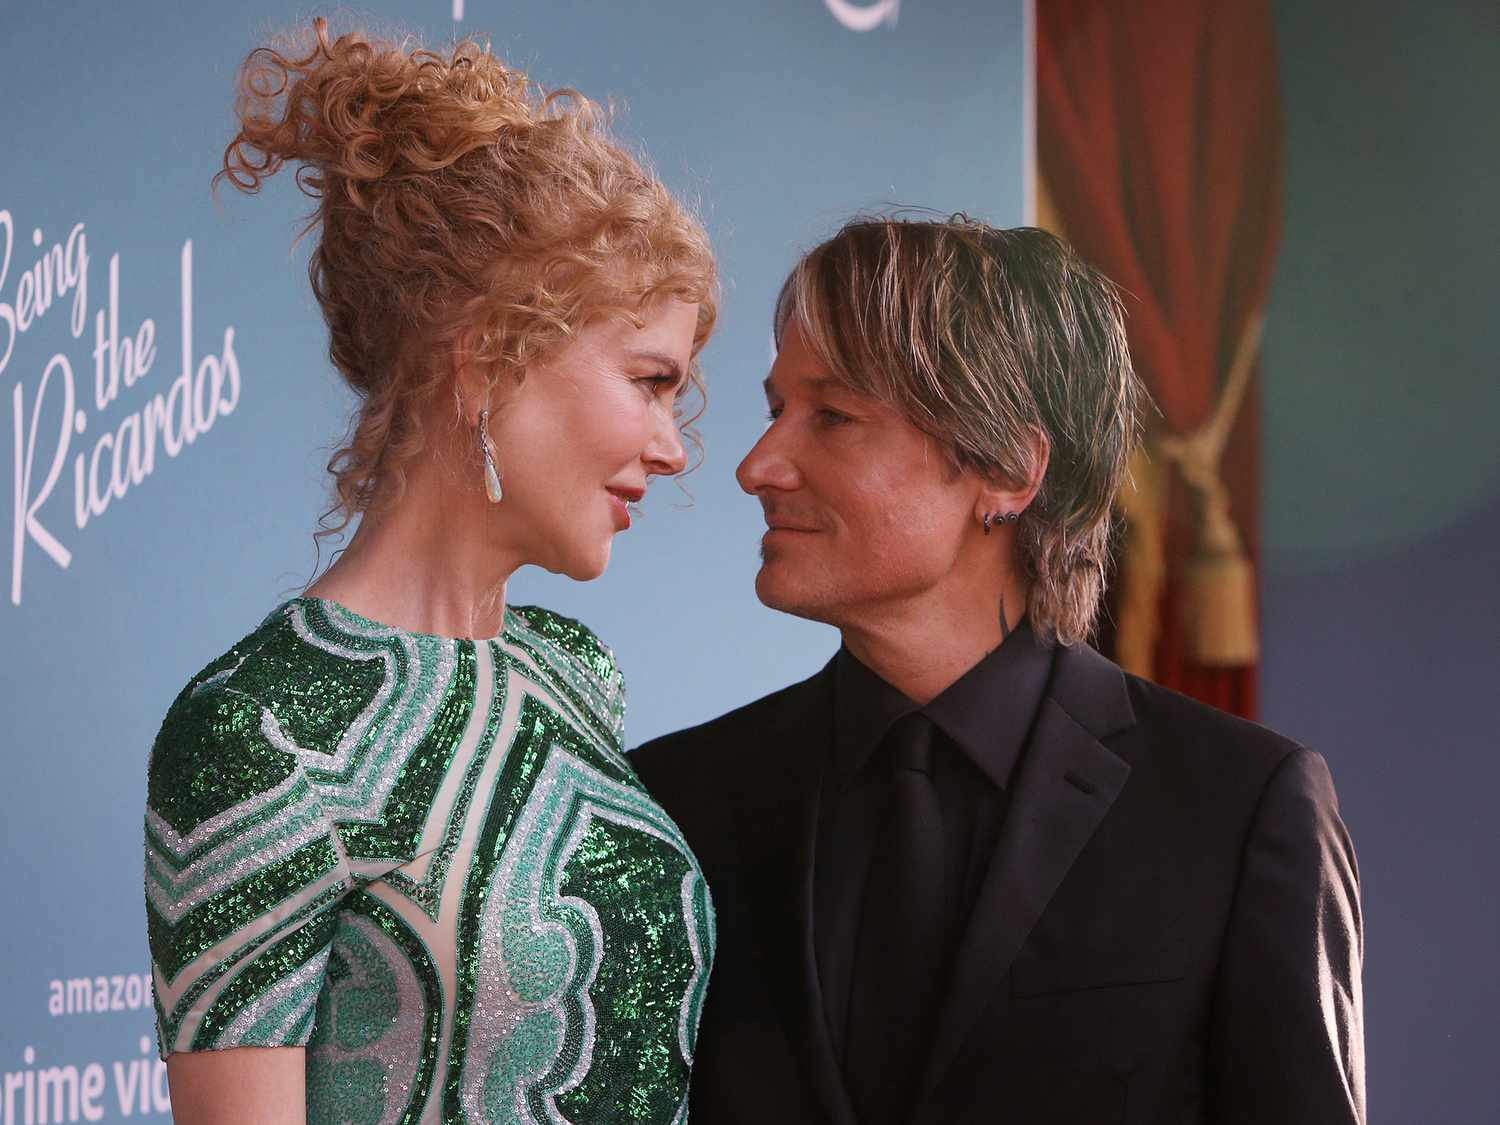 Nicole Kidman and Keith Urban attend the Australian premiere of Being The Ricardos at the Hayden Orpheum Picture Palace on December 15, 2021 in Sydney, Australia